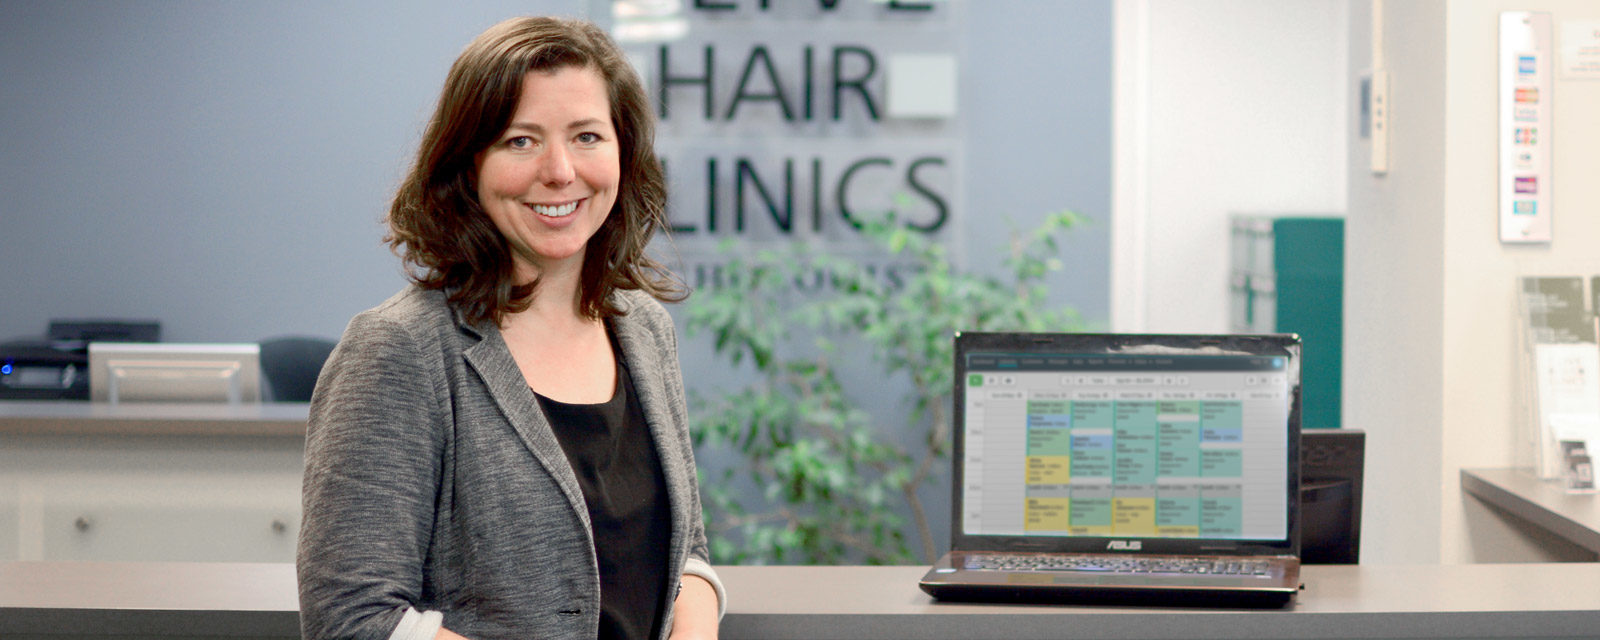 Timely helps this busy hair loss clinic run seven days a week